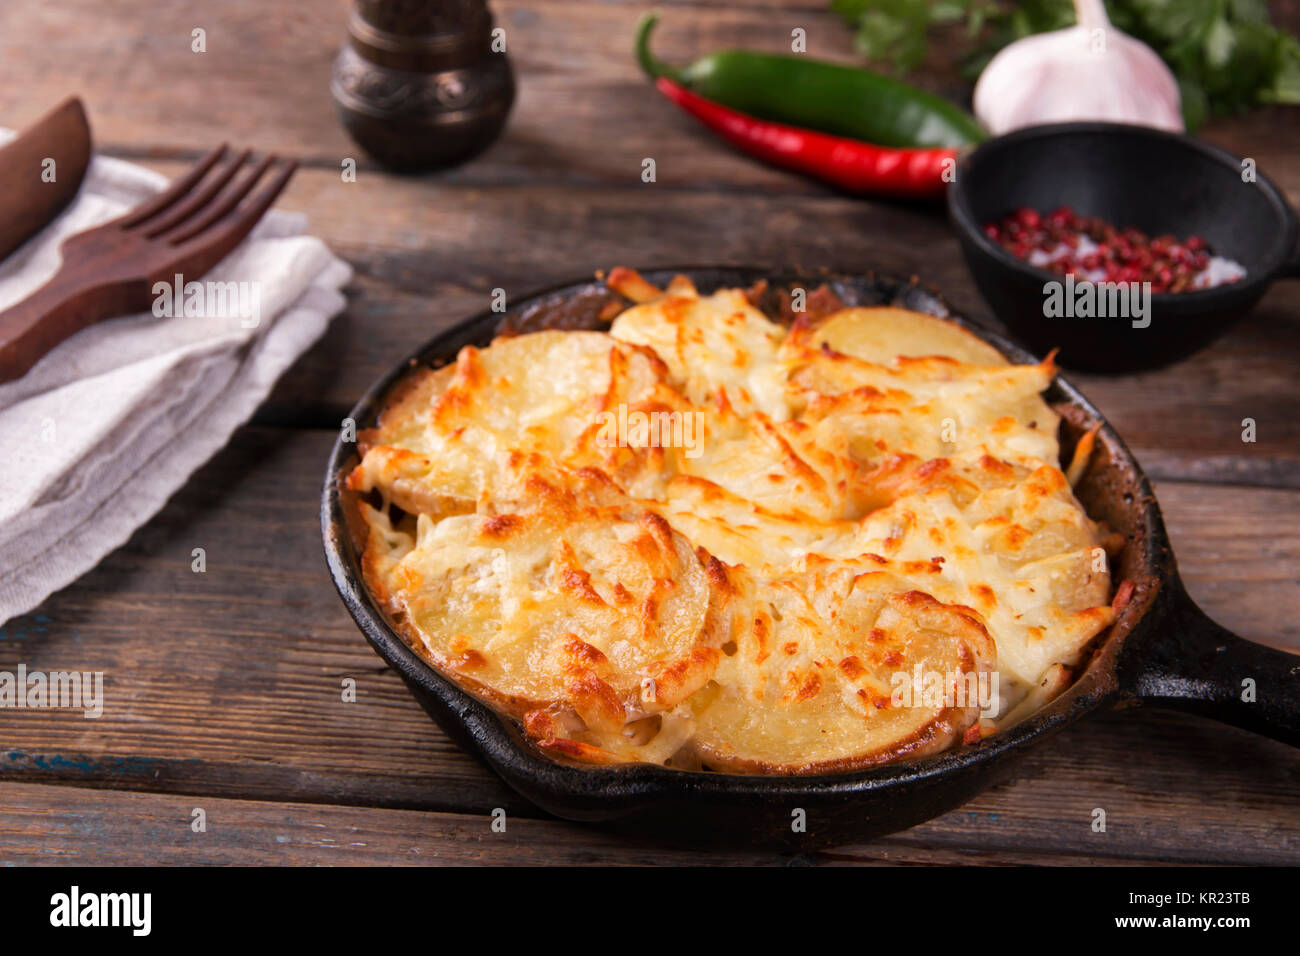 potato casserole with cheese in a frying pan serving vegetarian dish homemade Stock Photo